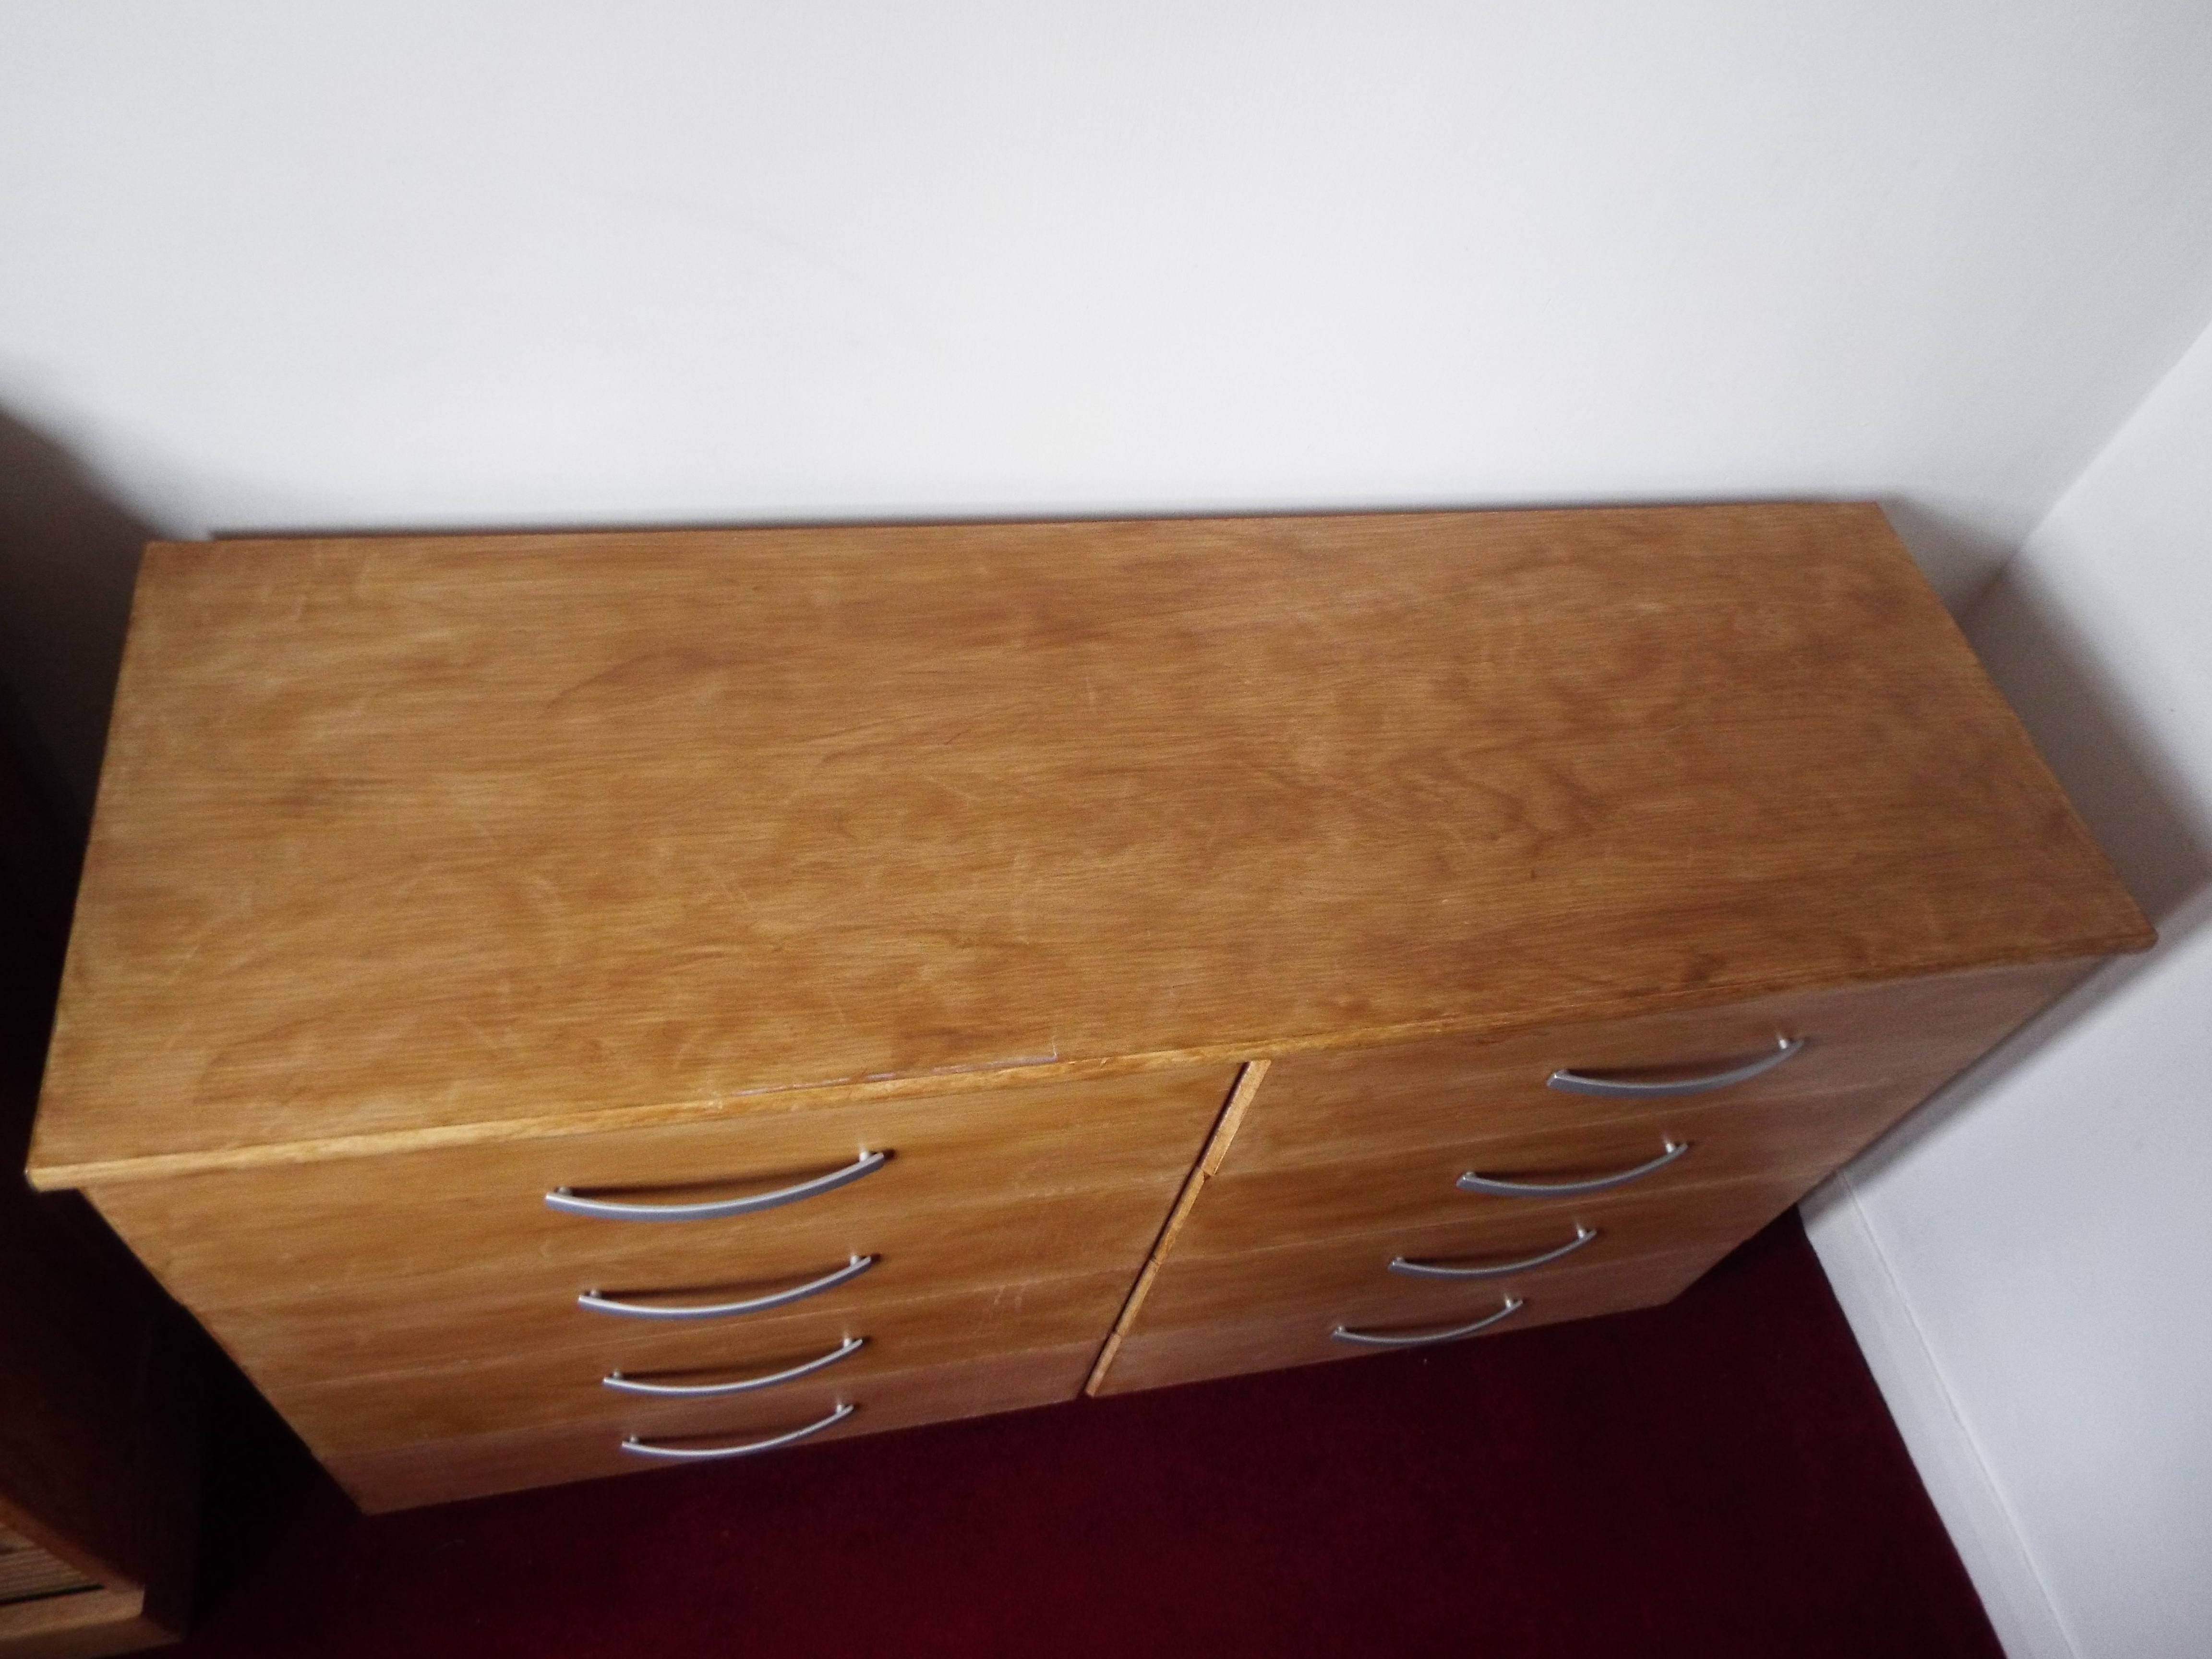 A chest of eight drawers measuring approximately 74 cm 162 cm x 40 cm. - Image 2 of 3